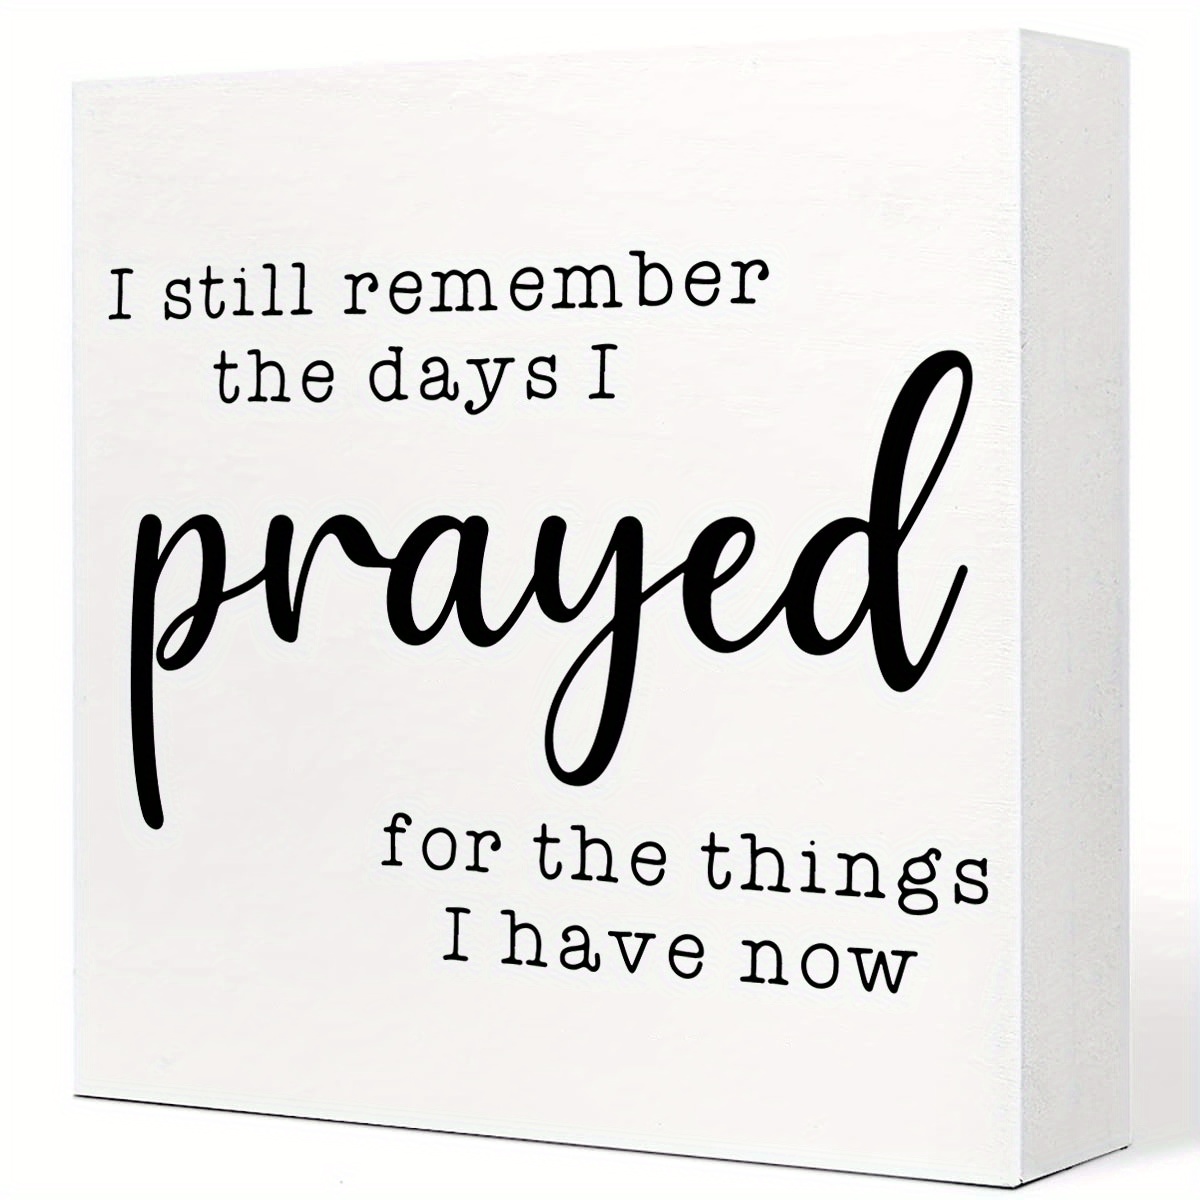 

1pc, I Still Remember The Days I Prayed Funny Office Wooden Box Sign Home Decor Office Wood Sign Desk Decoration Coworker Wood Block Plaque Box Sign For Shelf Office Cubicle